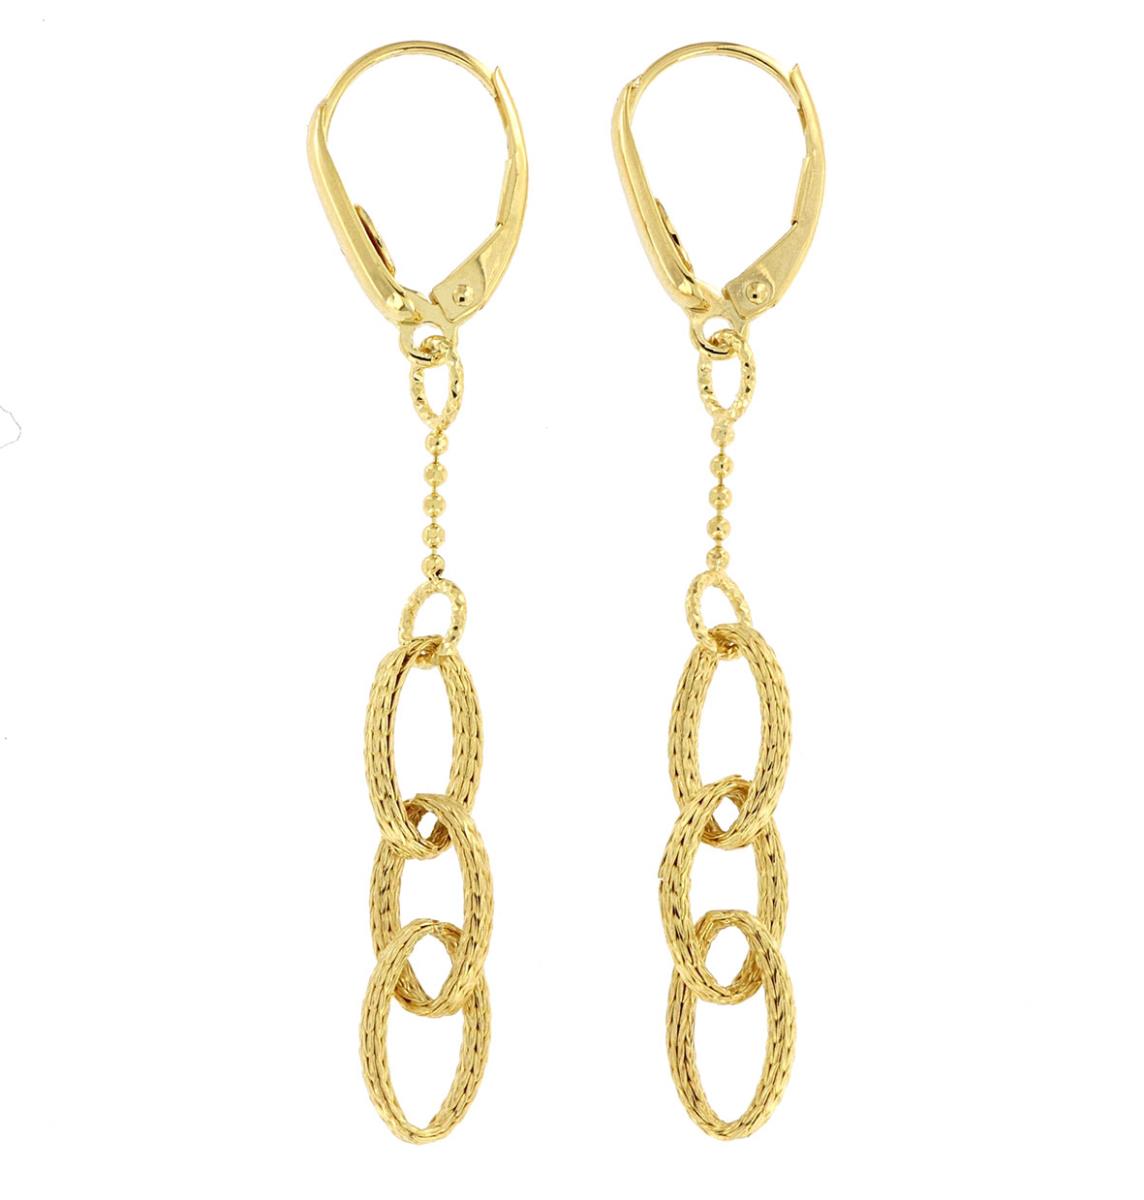 14K Yellow Gold High Polish Beads With Texture and Diamond Cut Multi Link Dangle Earrings With Leverback, 60X6.1MM